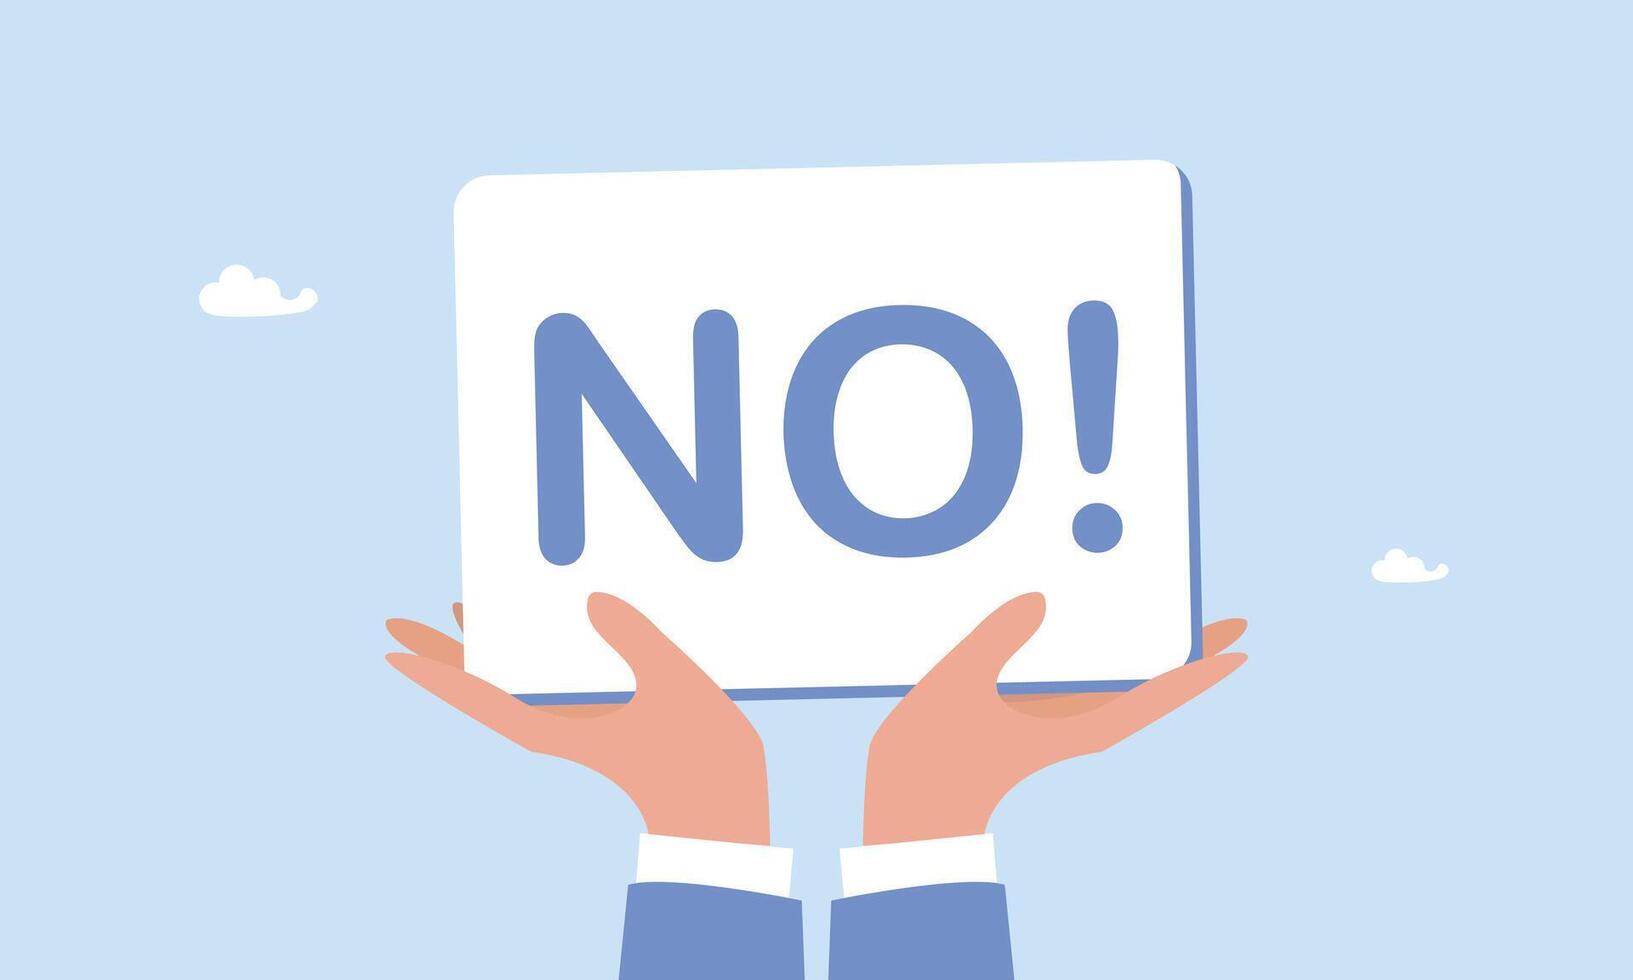 Say no, rejection or refuse to do thing, negative or stop sign, disagreement expression, communicate to stop or denied concept, businessman hold sign with the word NO with strong rejection impression. vector